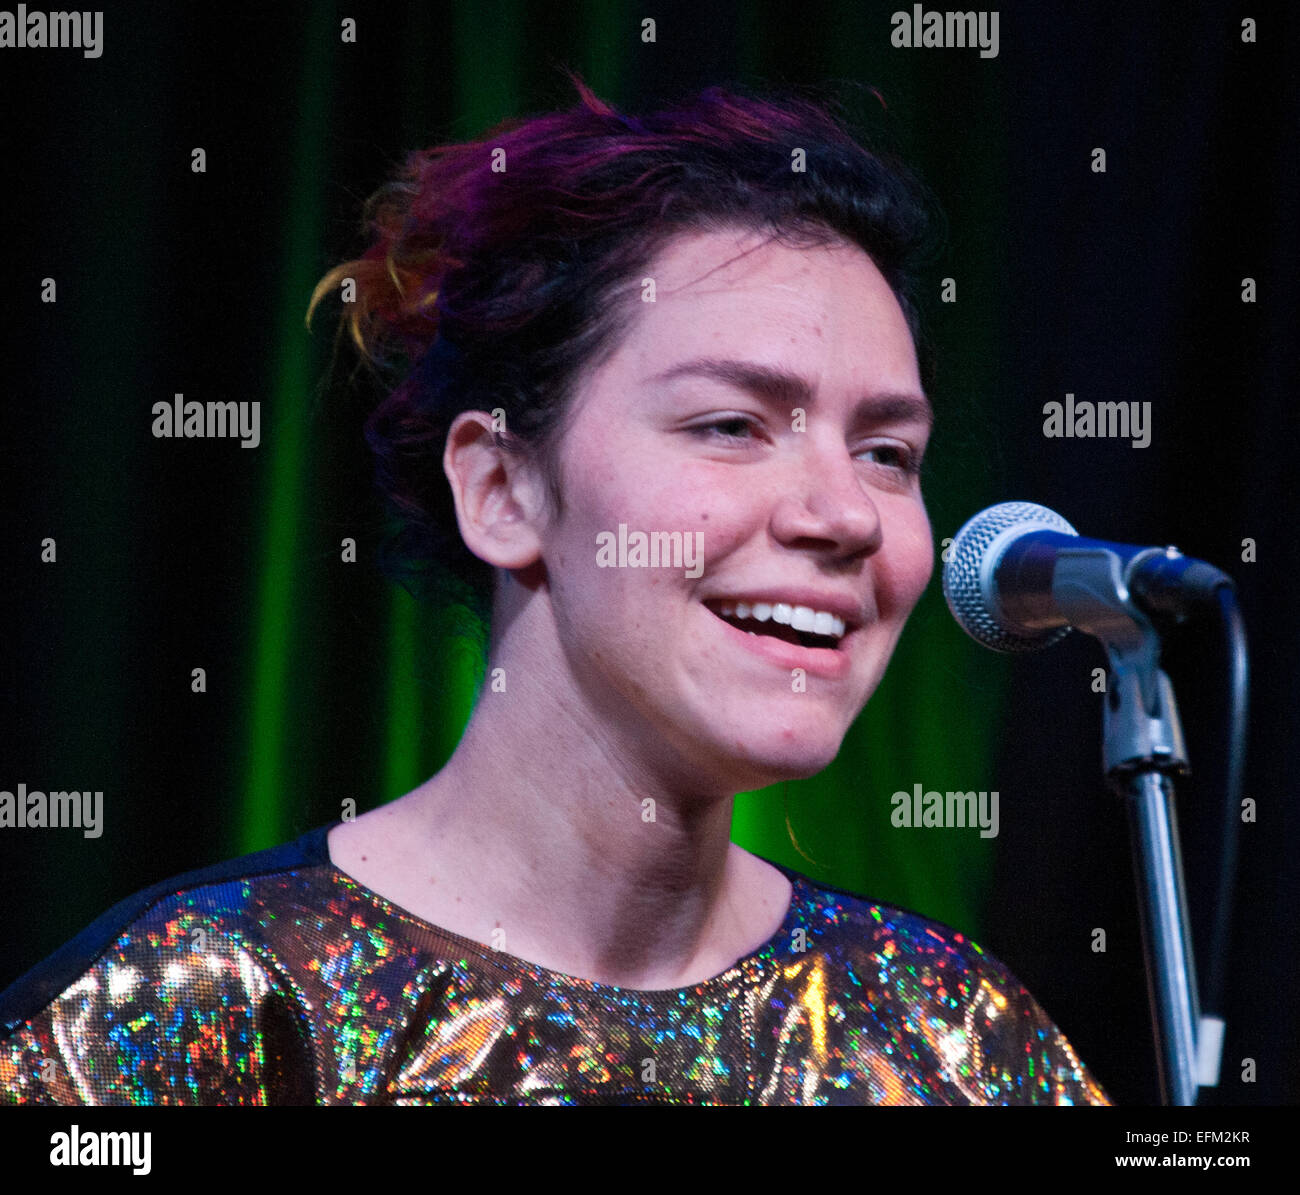 Bala Cynwyd, Pennsylvania, USA. 6th February, 2015. American Indie Pop Singer-Songwriter Genevieve Performs at Radio 104.5's Performance Theatre on February 06, 2015 in Bala Cynwyd, Pennsylvania, United States. Credit:  Paul Froggatt/Alamy Live News Stock Photo